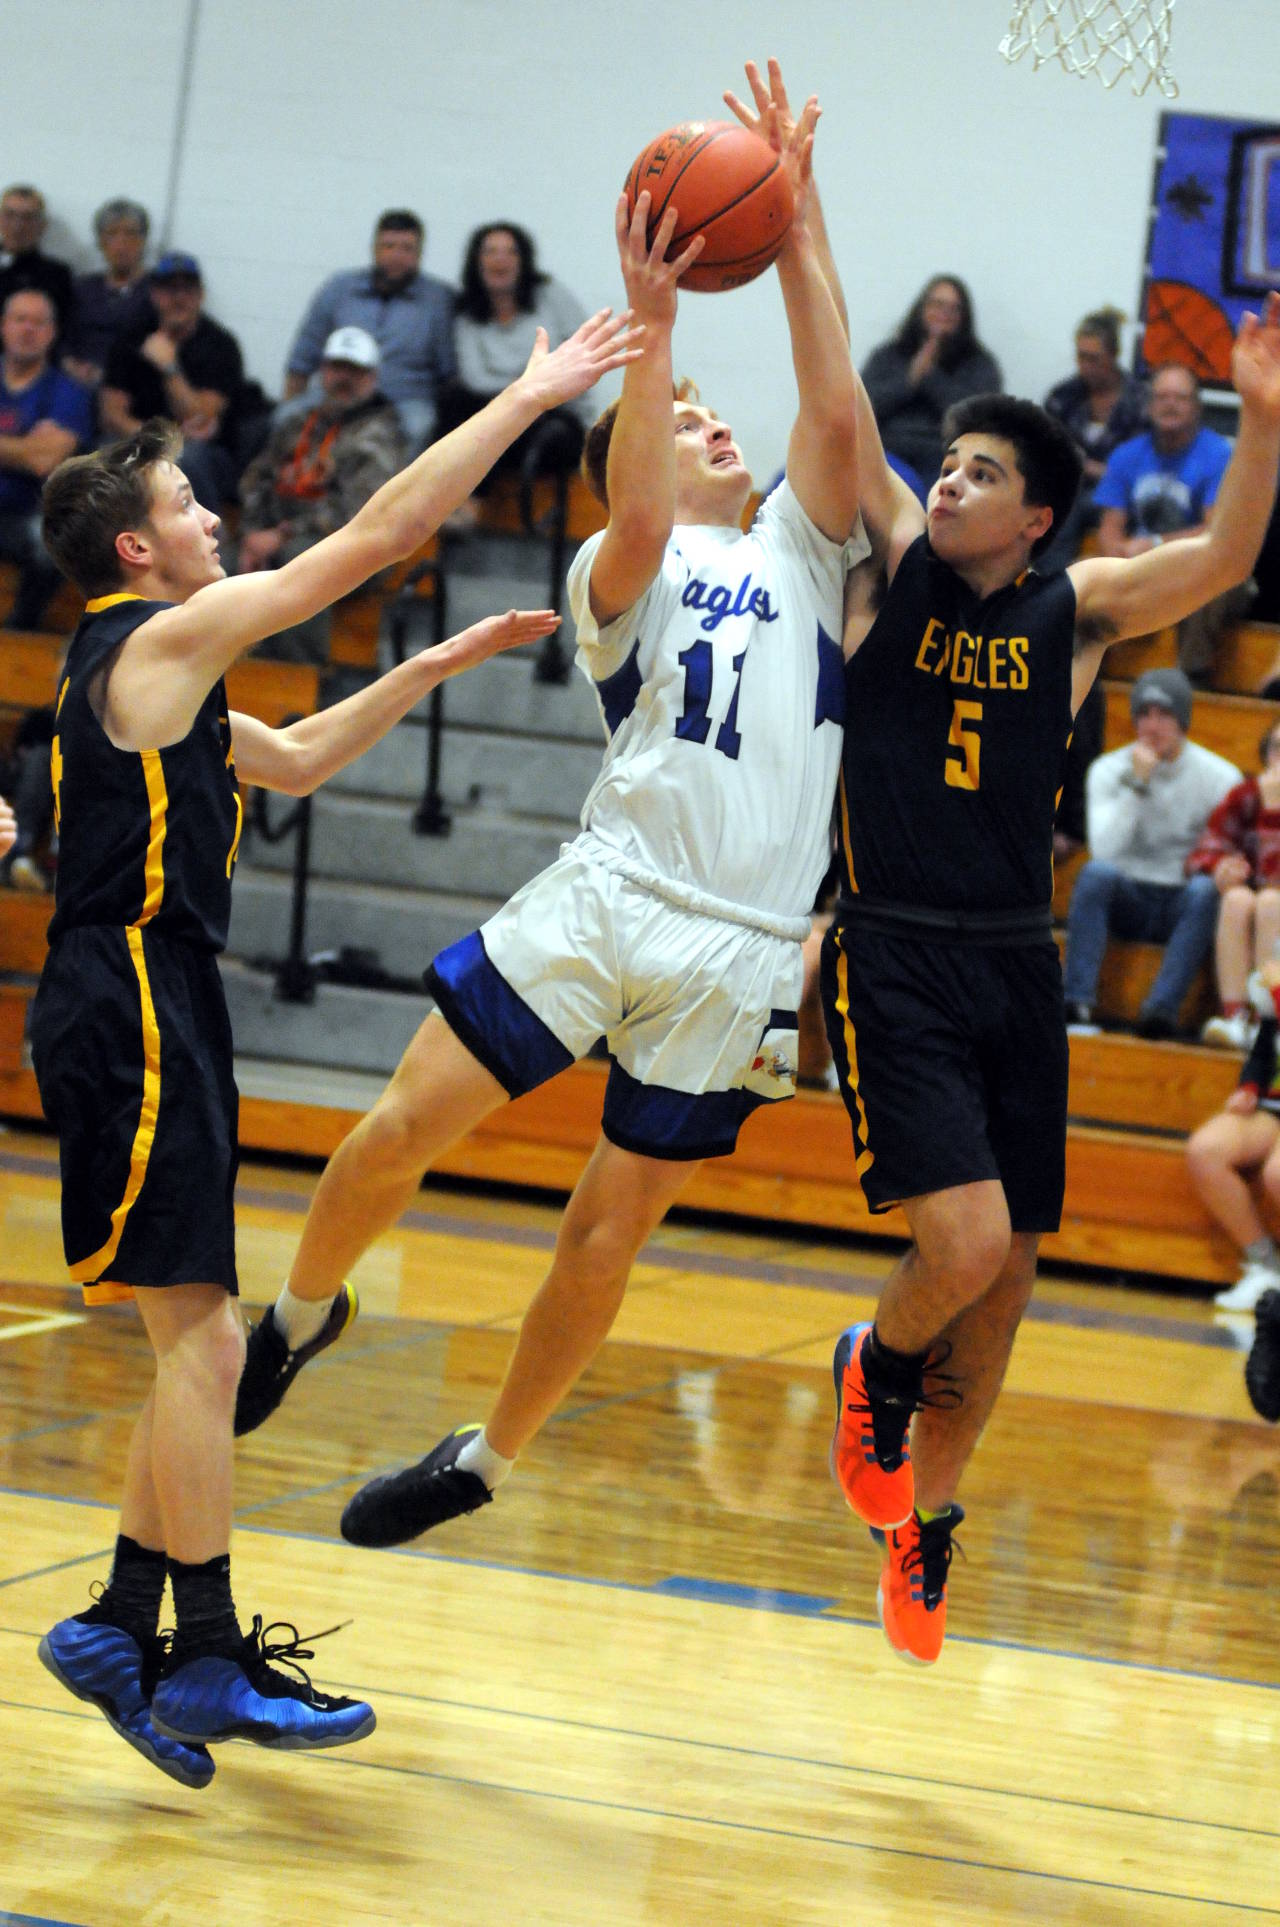 Elma’s Nick Church (11) is met at the basket by Pope John Paul’s Francis Pettis (5) and Spencer Humberd during Elma’s 73-45 victory on Monday in Elma. (Ryan Sparks | Grays Harbor News Group)